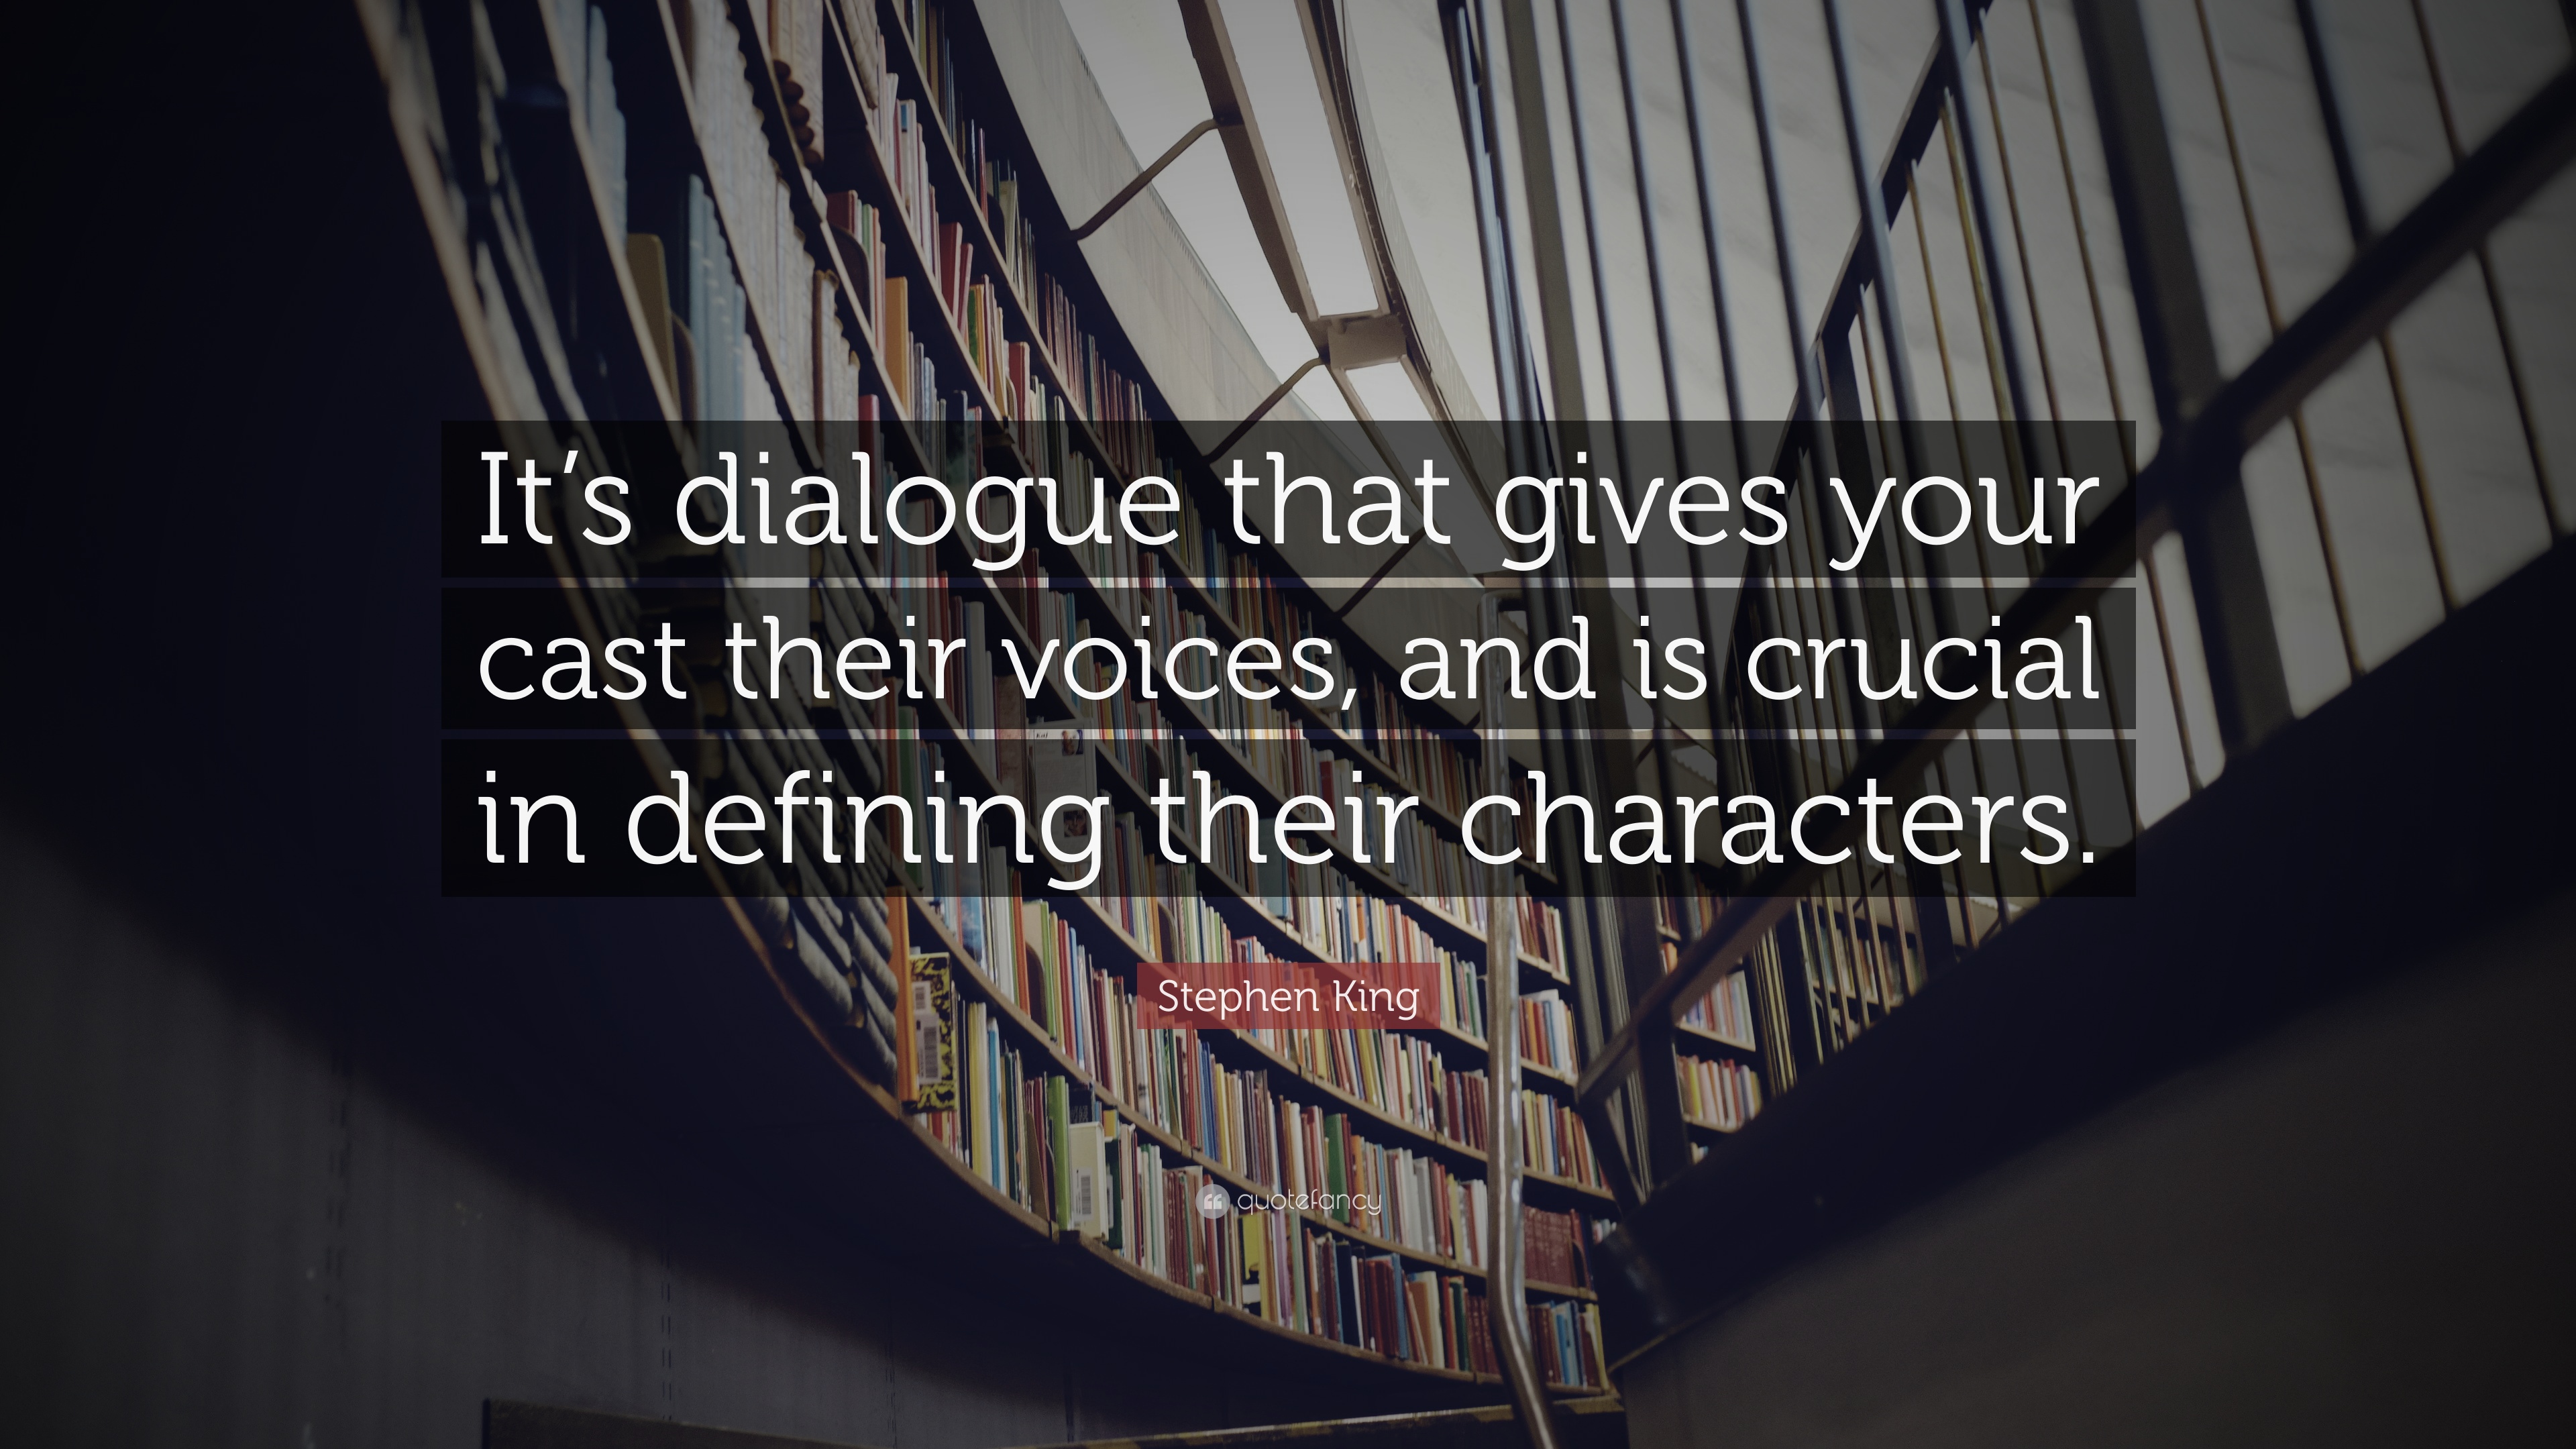 Stephen King Quotes: Lessons in Characterization and Dialogue